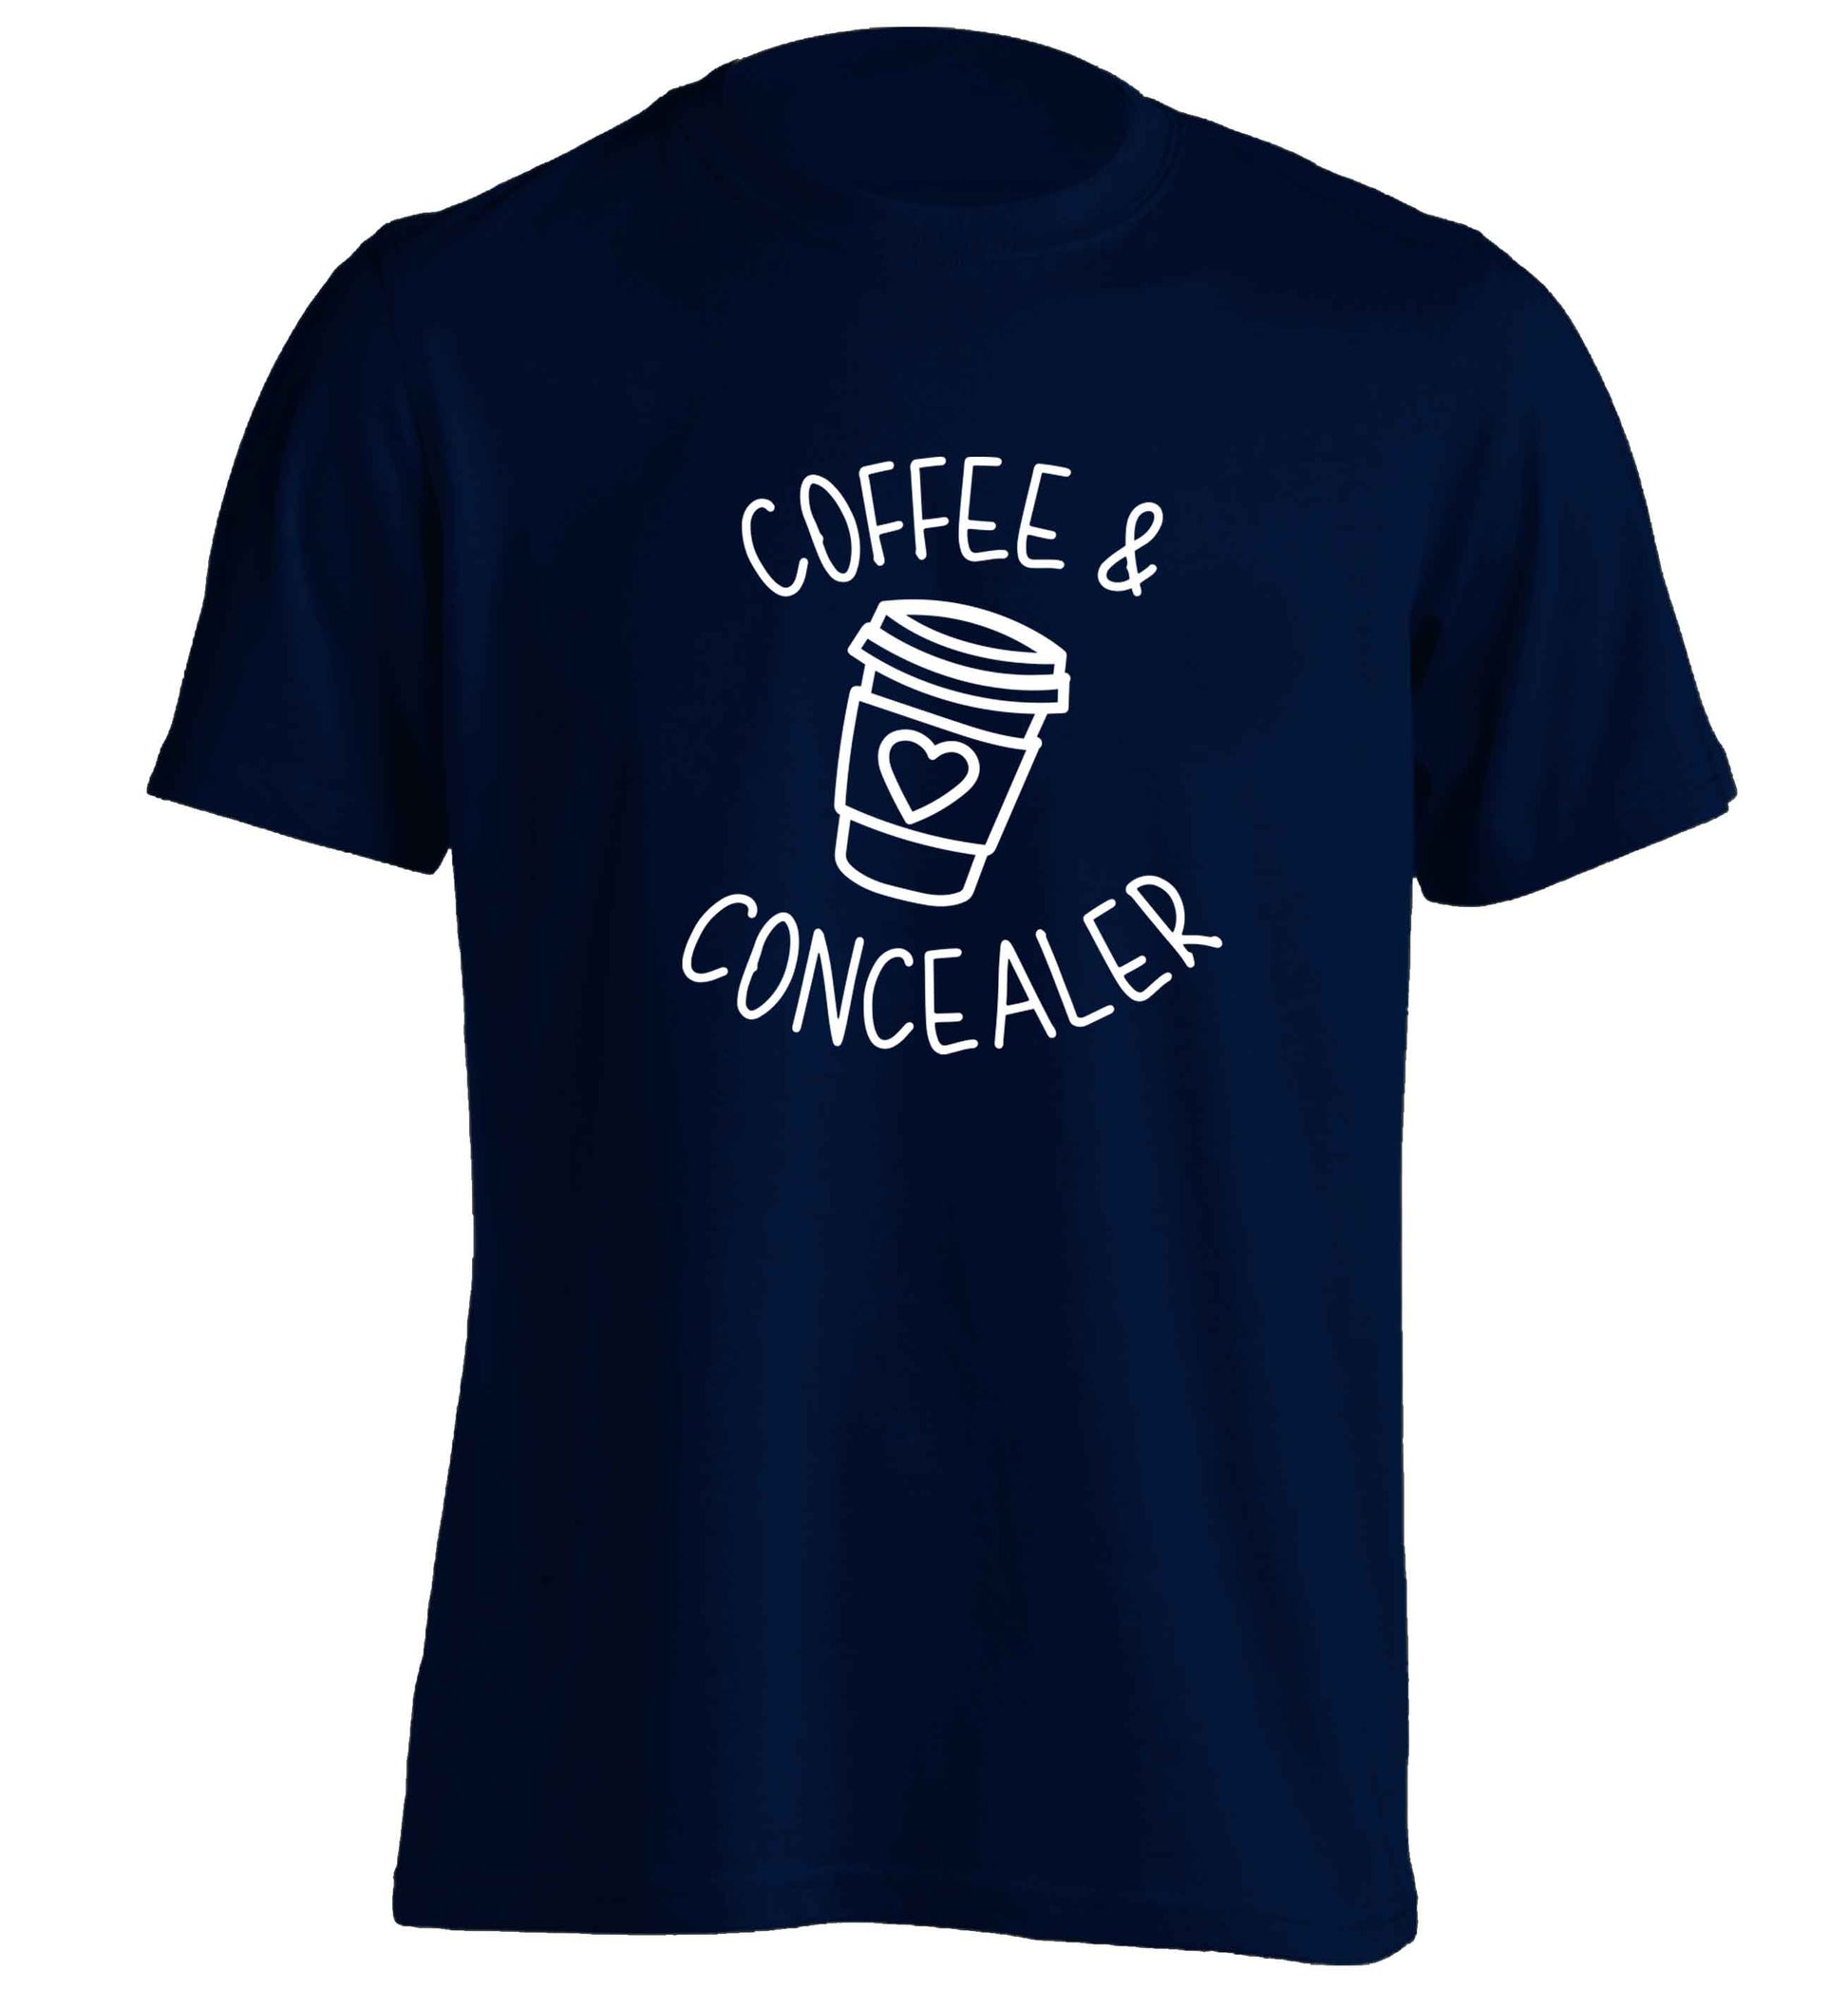 Coffee and concealer adults unisex navy Tshirt 2XL